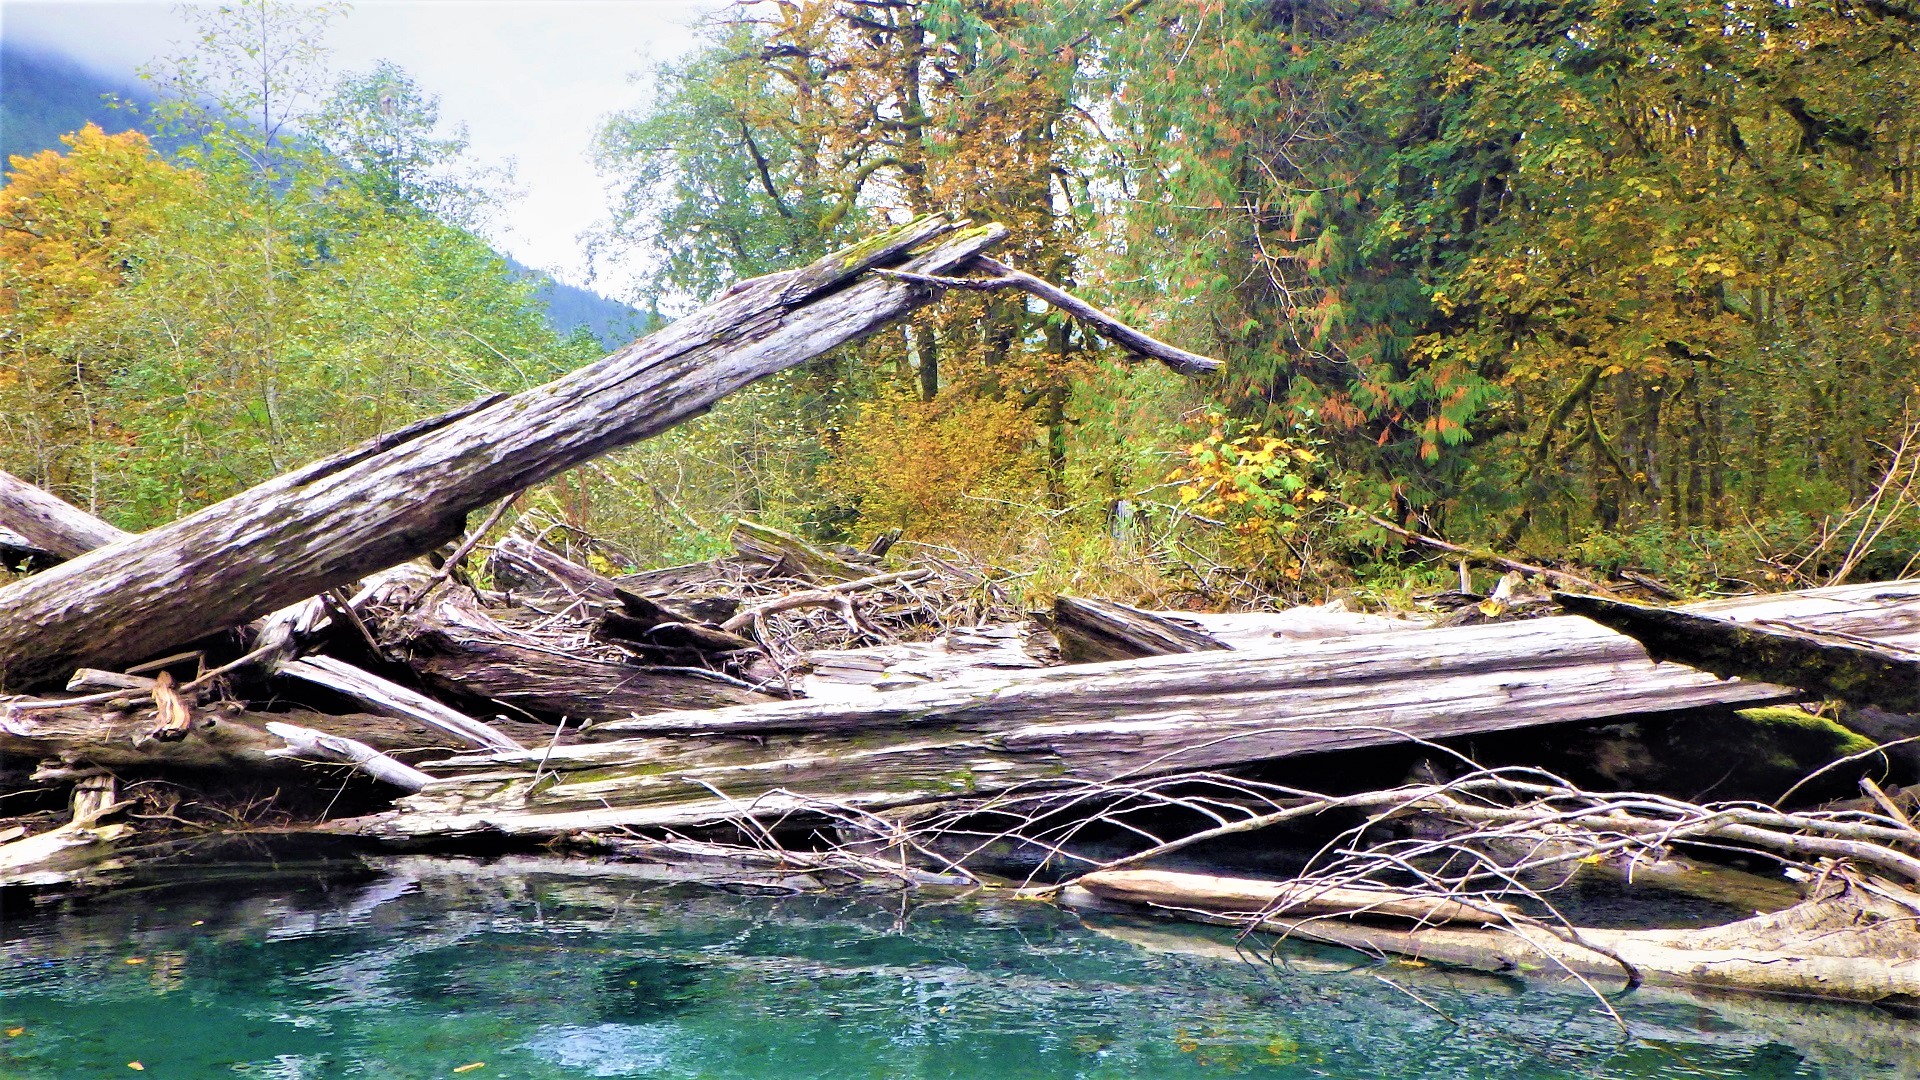 A wood pile spanning a wide river